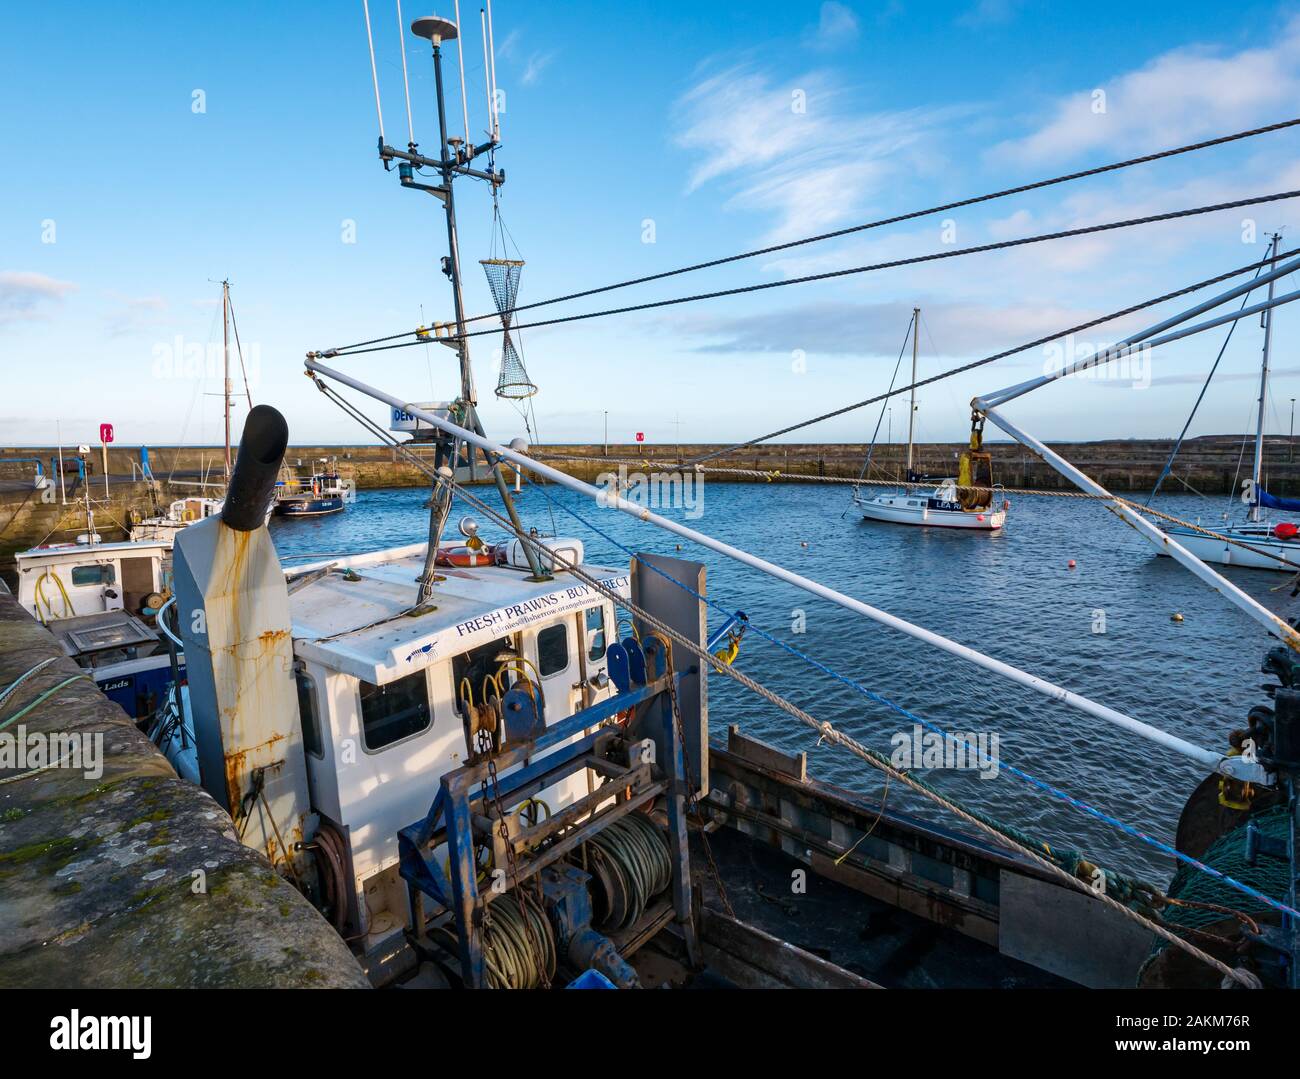 Fishing boat moored in harbour with advert for fresh prawns, Fisherrow Harbour, Musselburgh, Scotland, UK Stock Photo